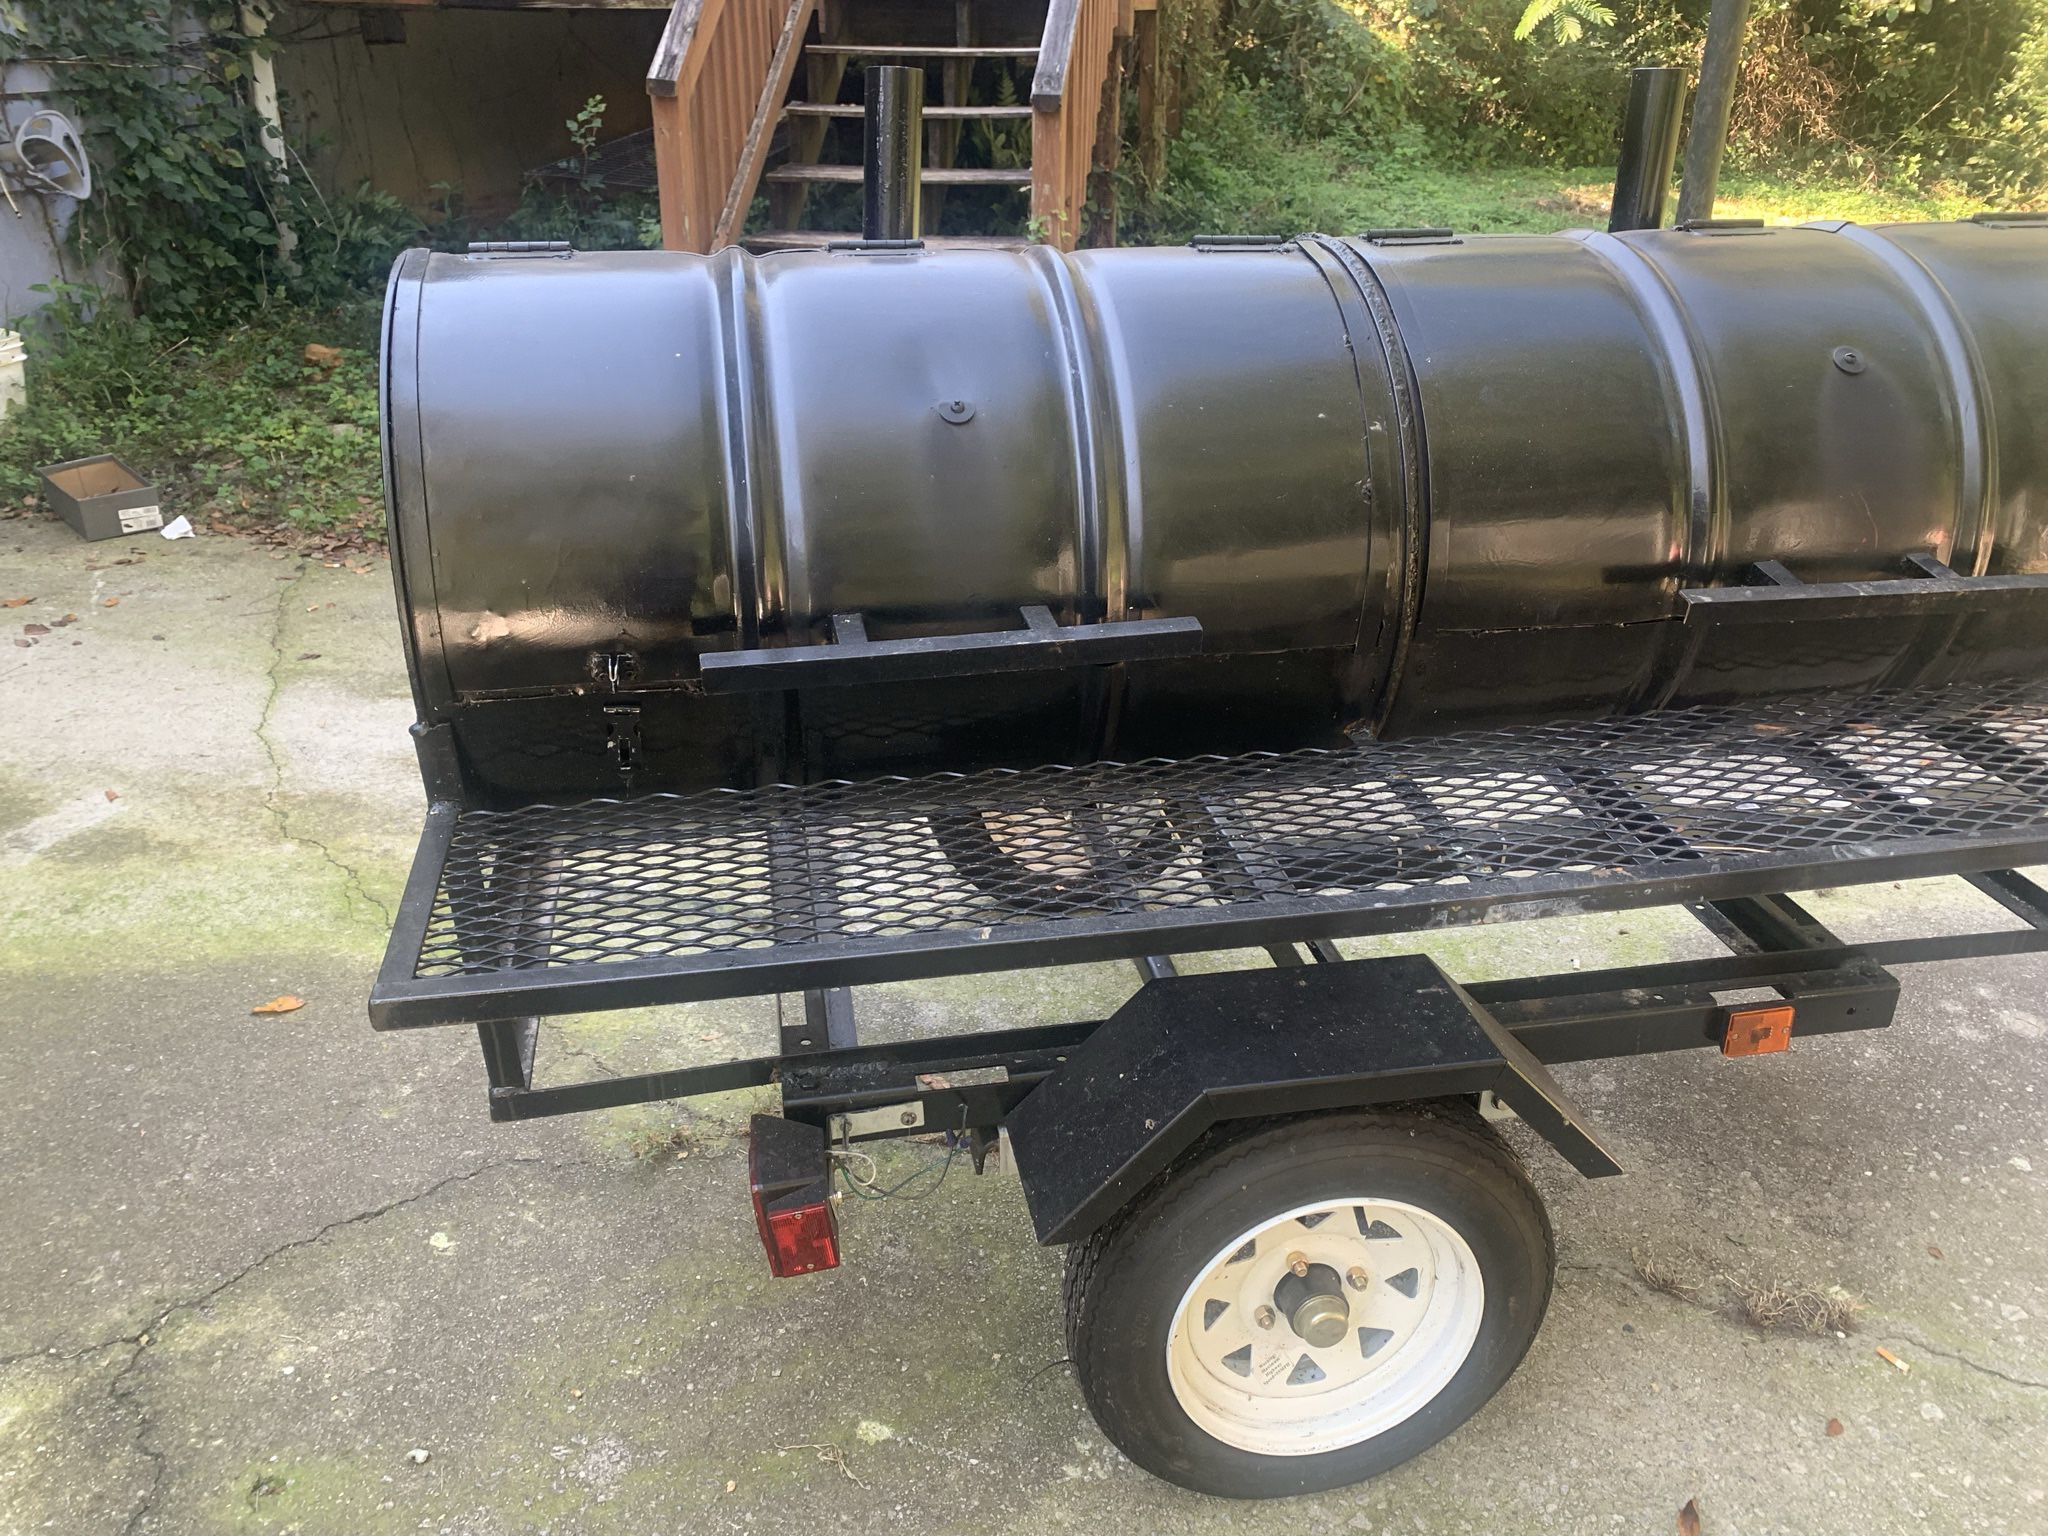 BBQ Barbeque Grill / Smoker on Trailer